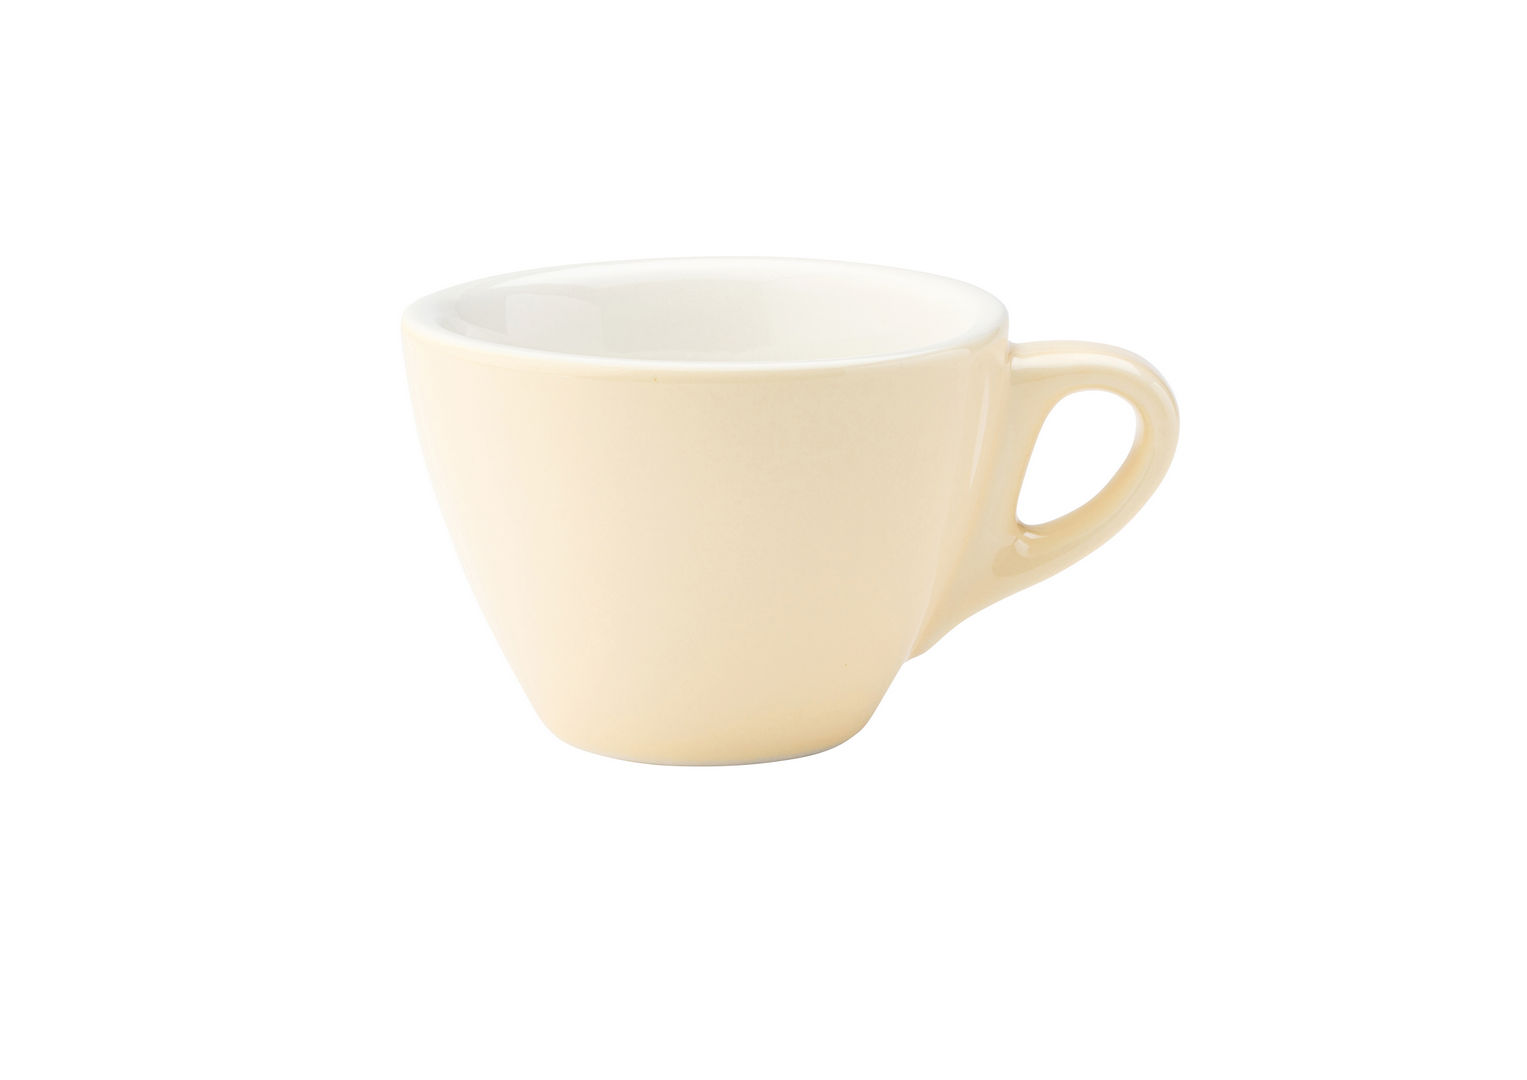 Barista Flat White Cream Cup 5.5oz (16cl) - CT8147-000000-B01012 (Pack of 12)